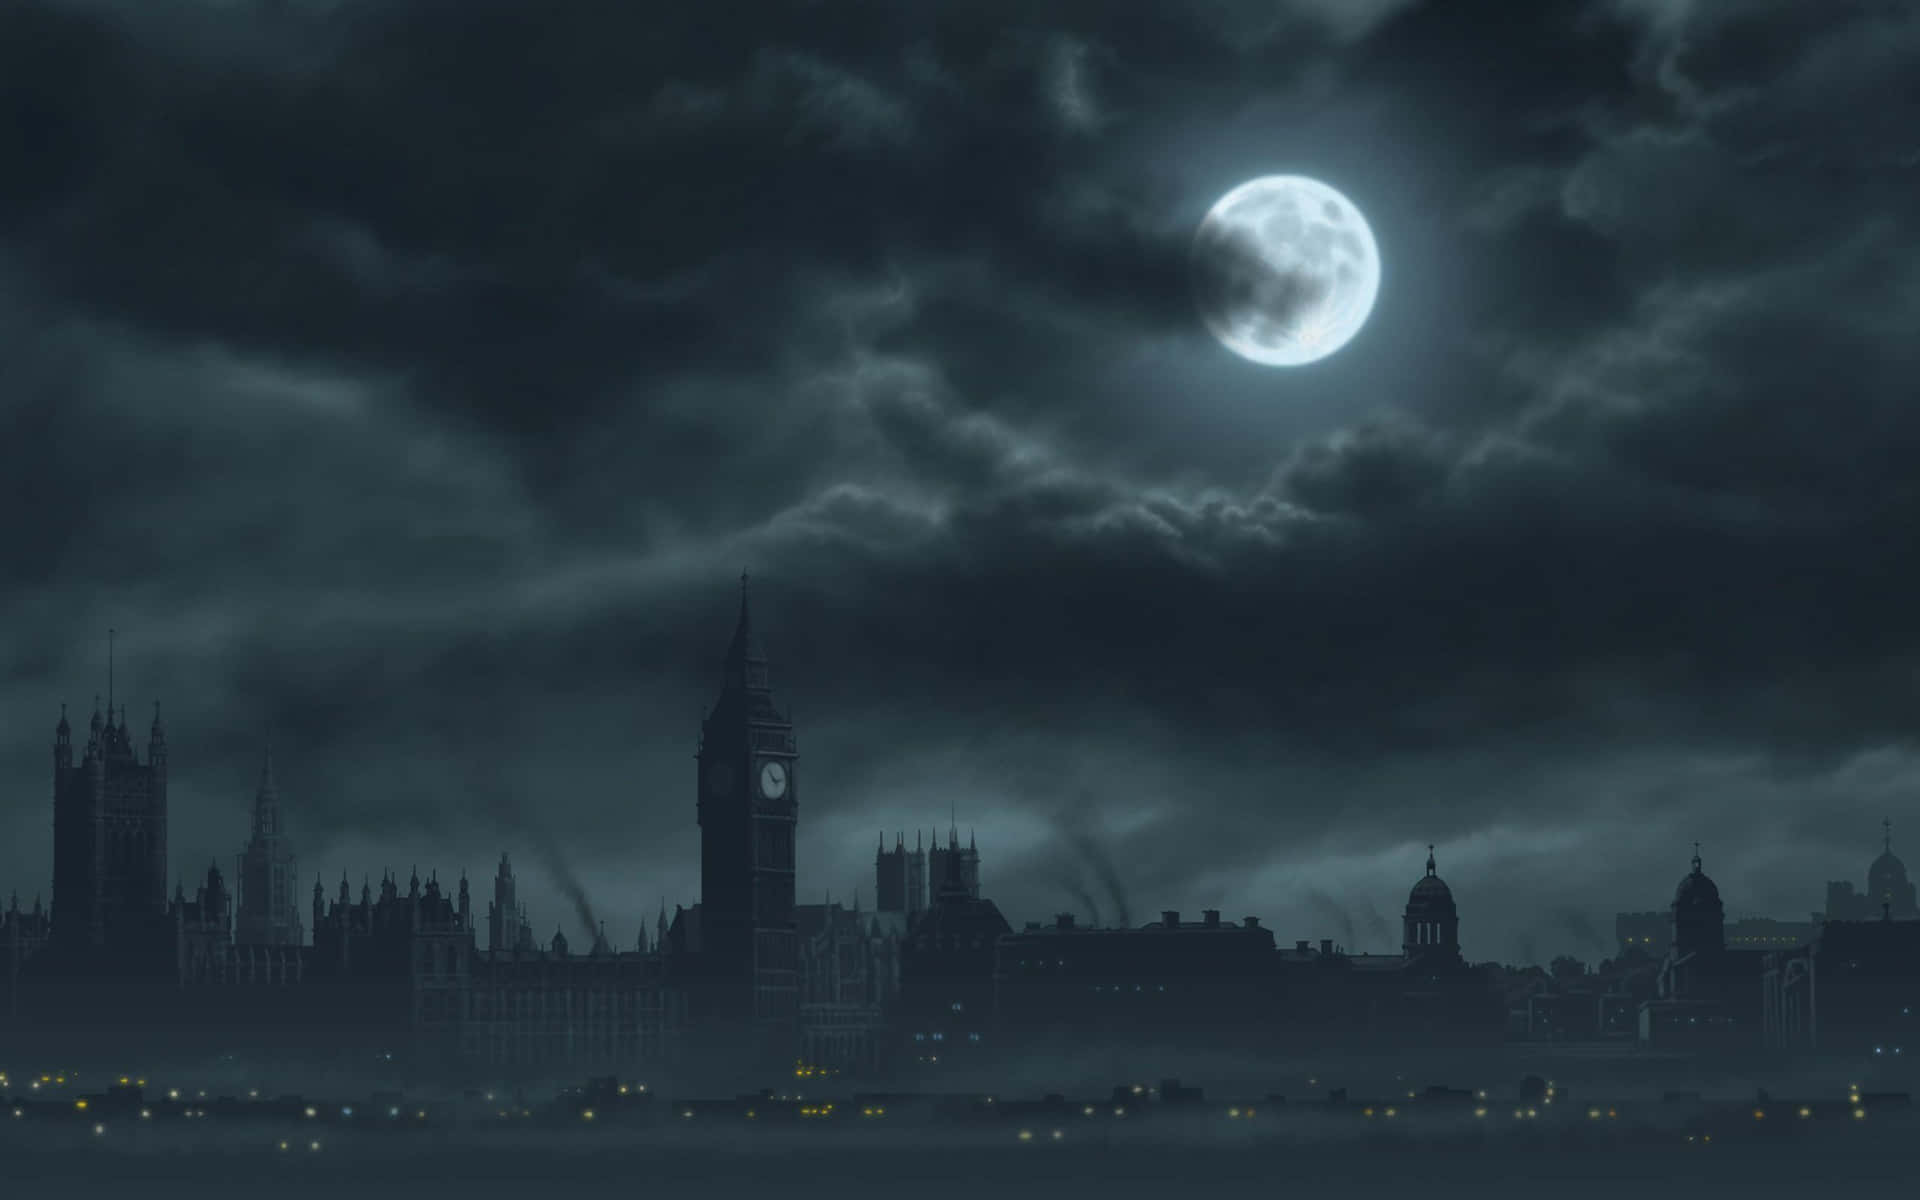 A Dark Night Sky With A Full Moon Over London